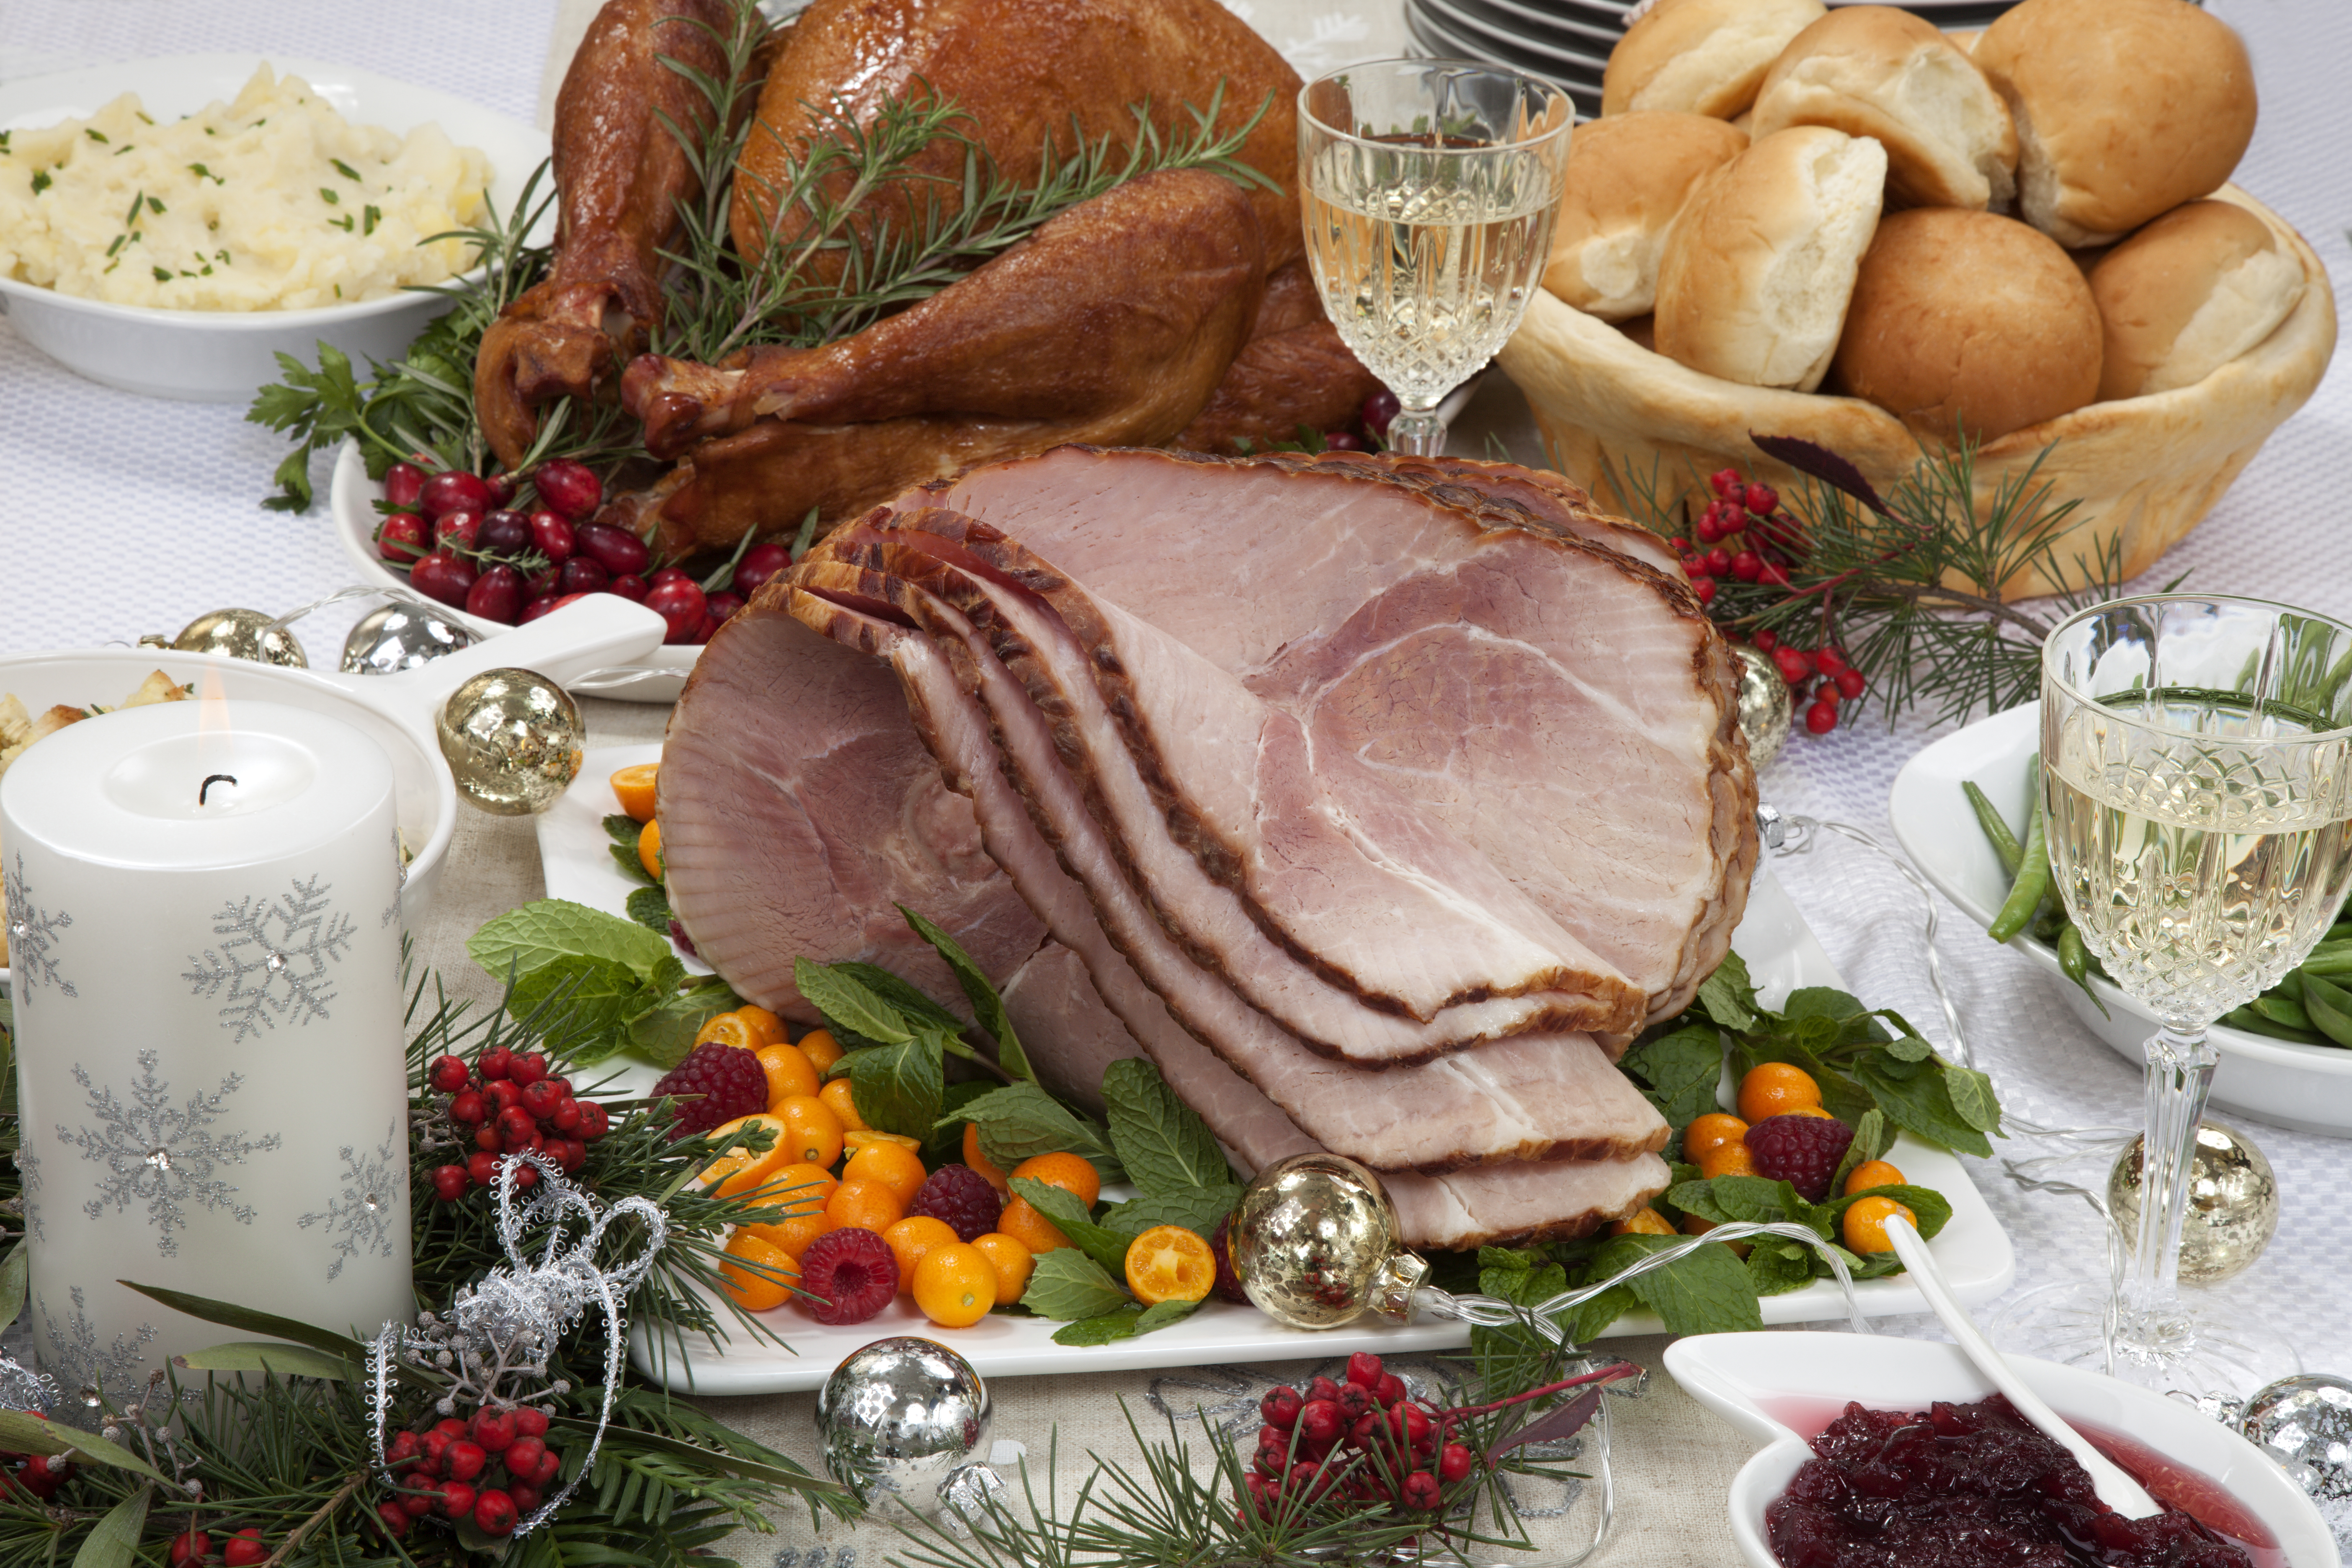 Gobble gobble: Canada’s meat supply looking good for Christmas, sector says